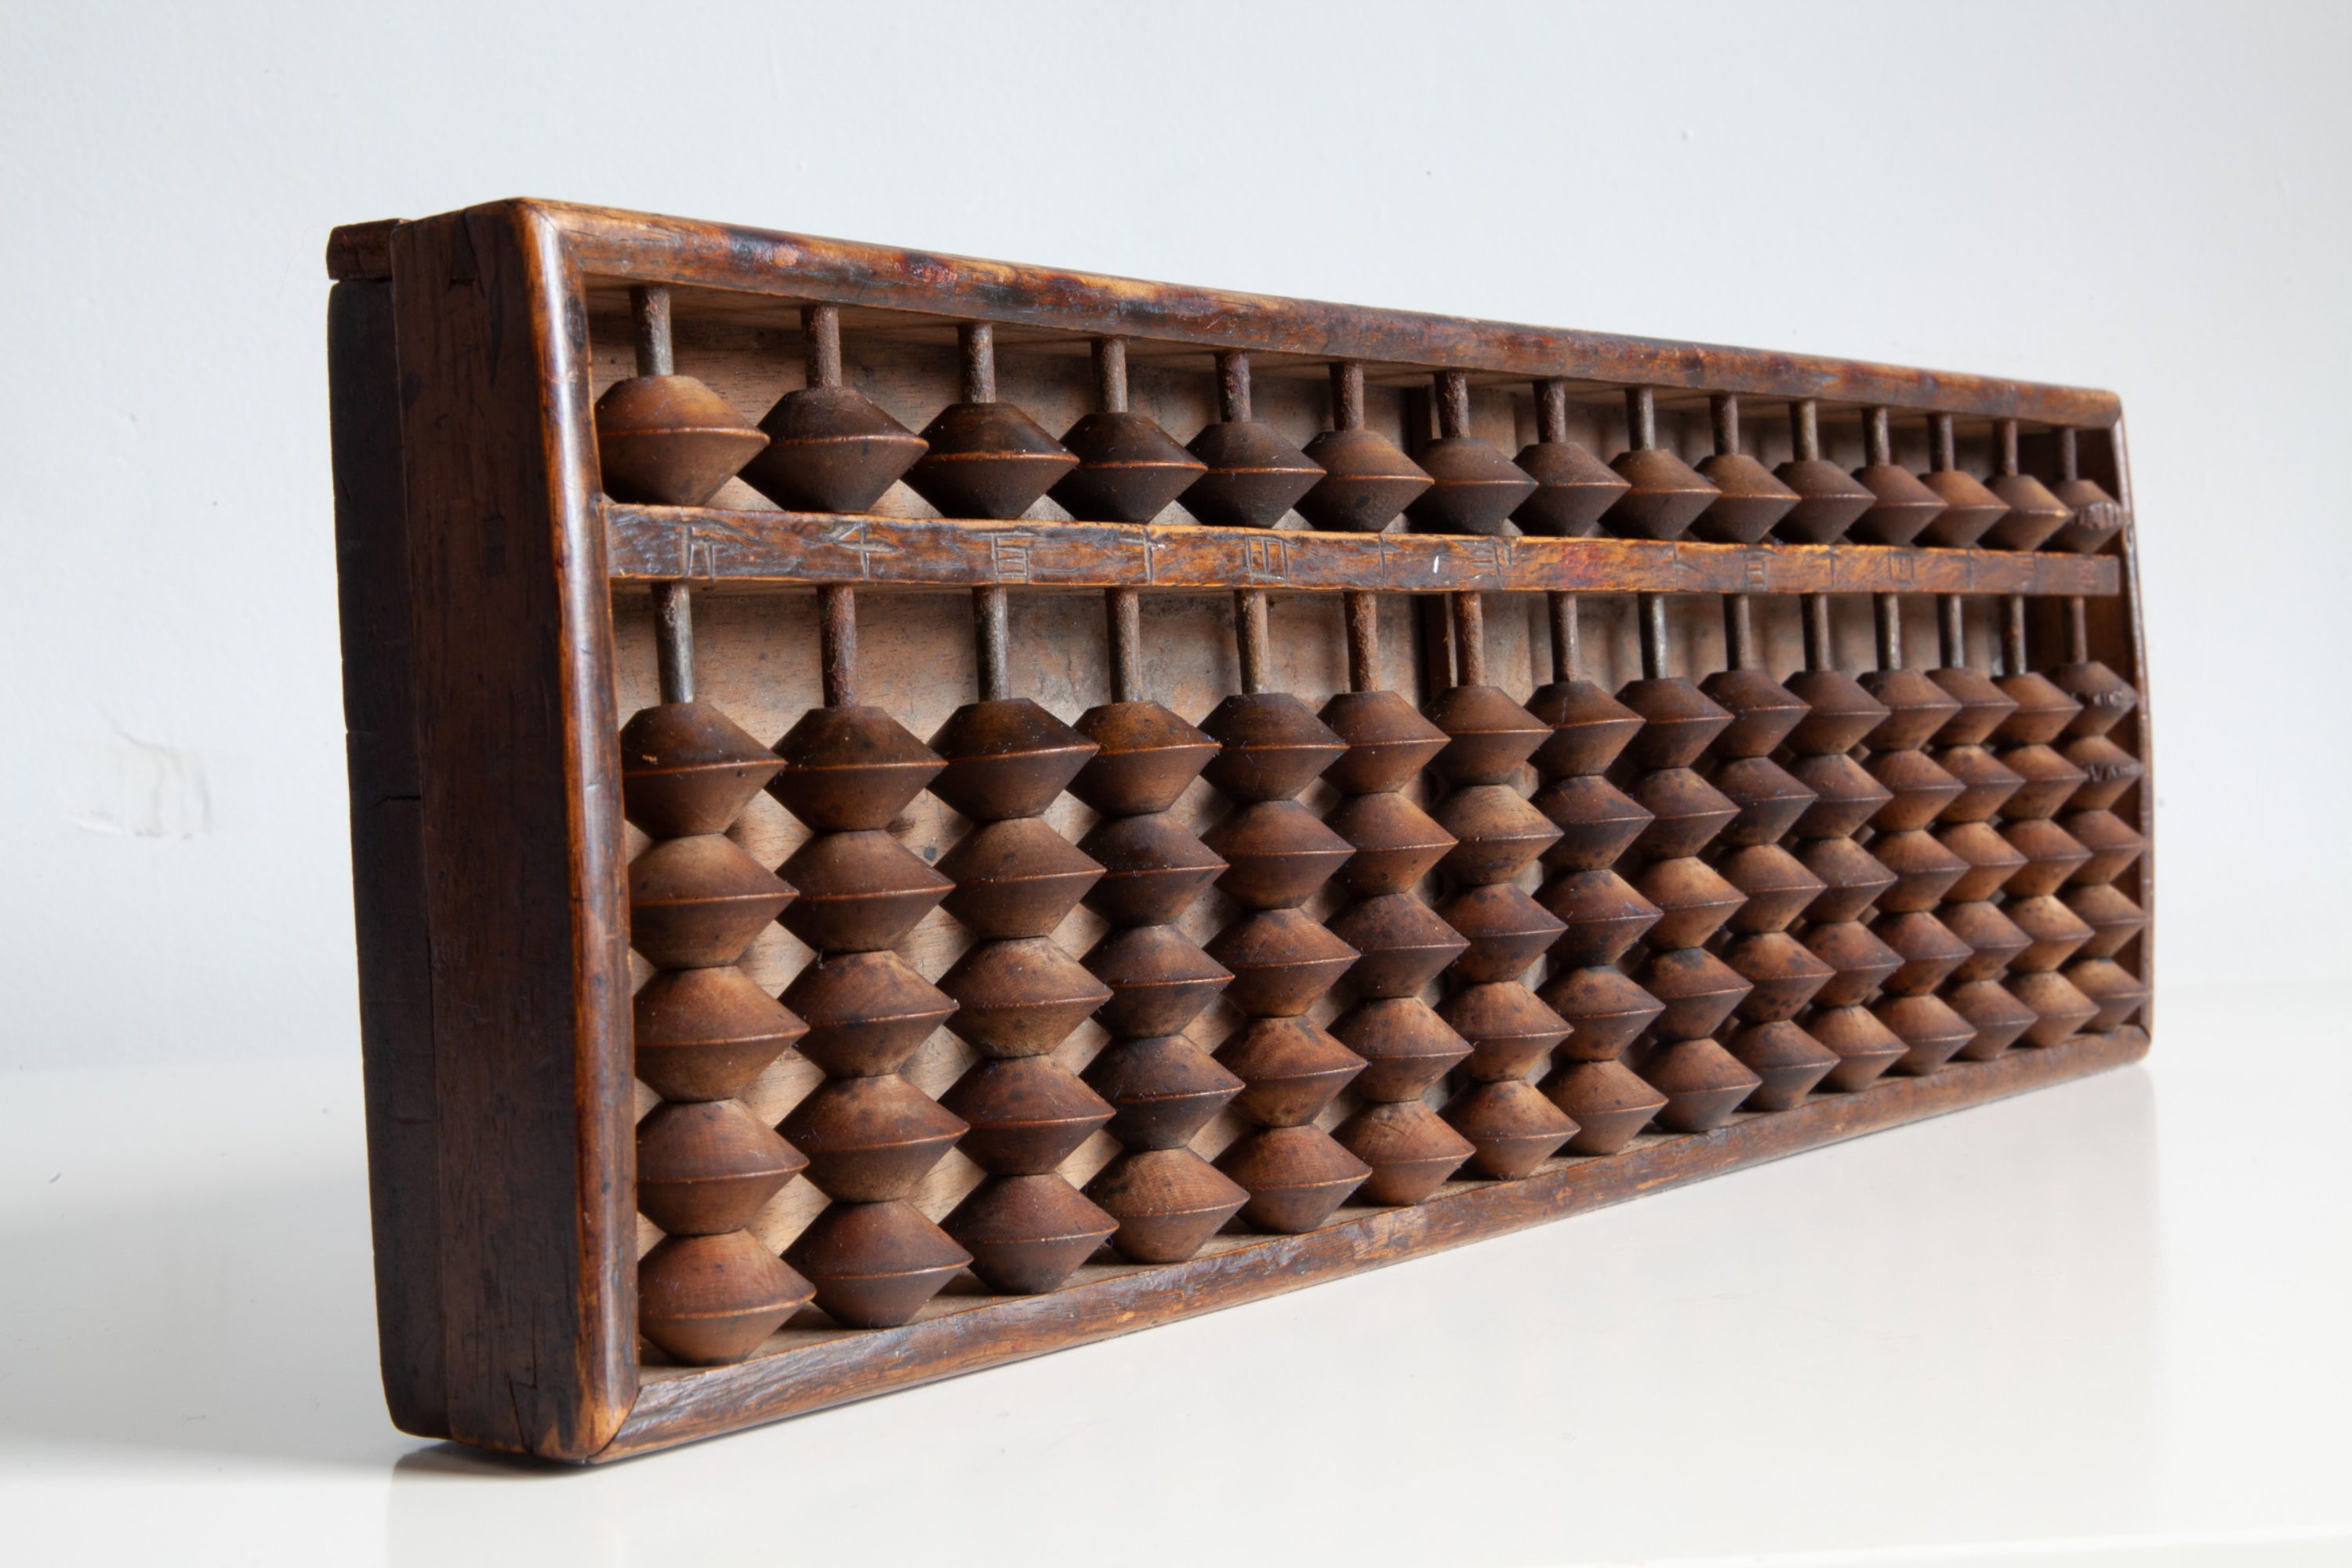 picture of wooden abacus